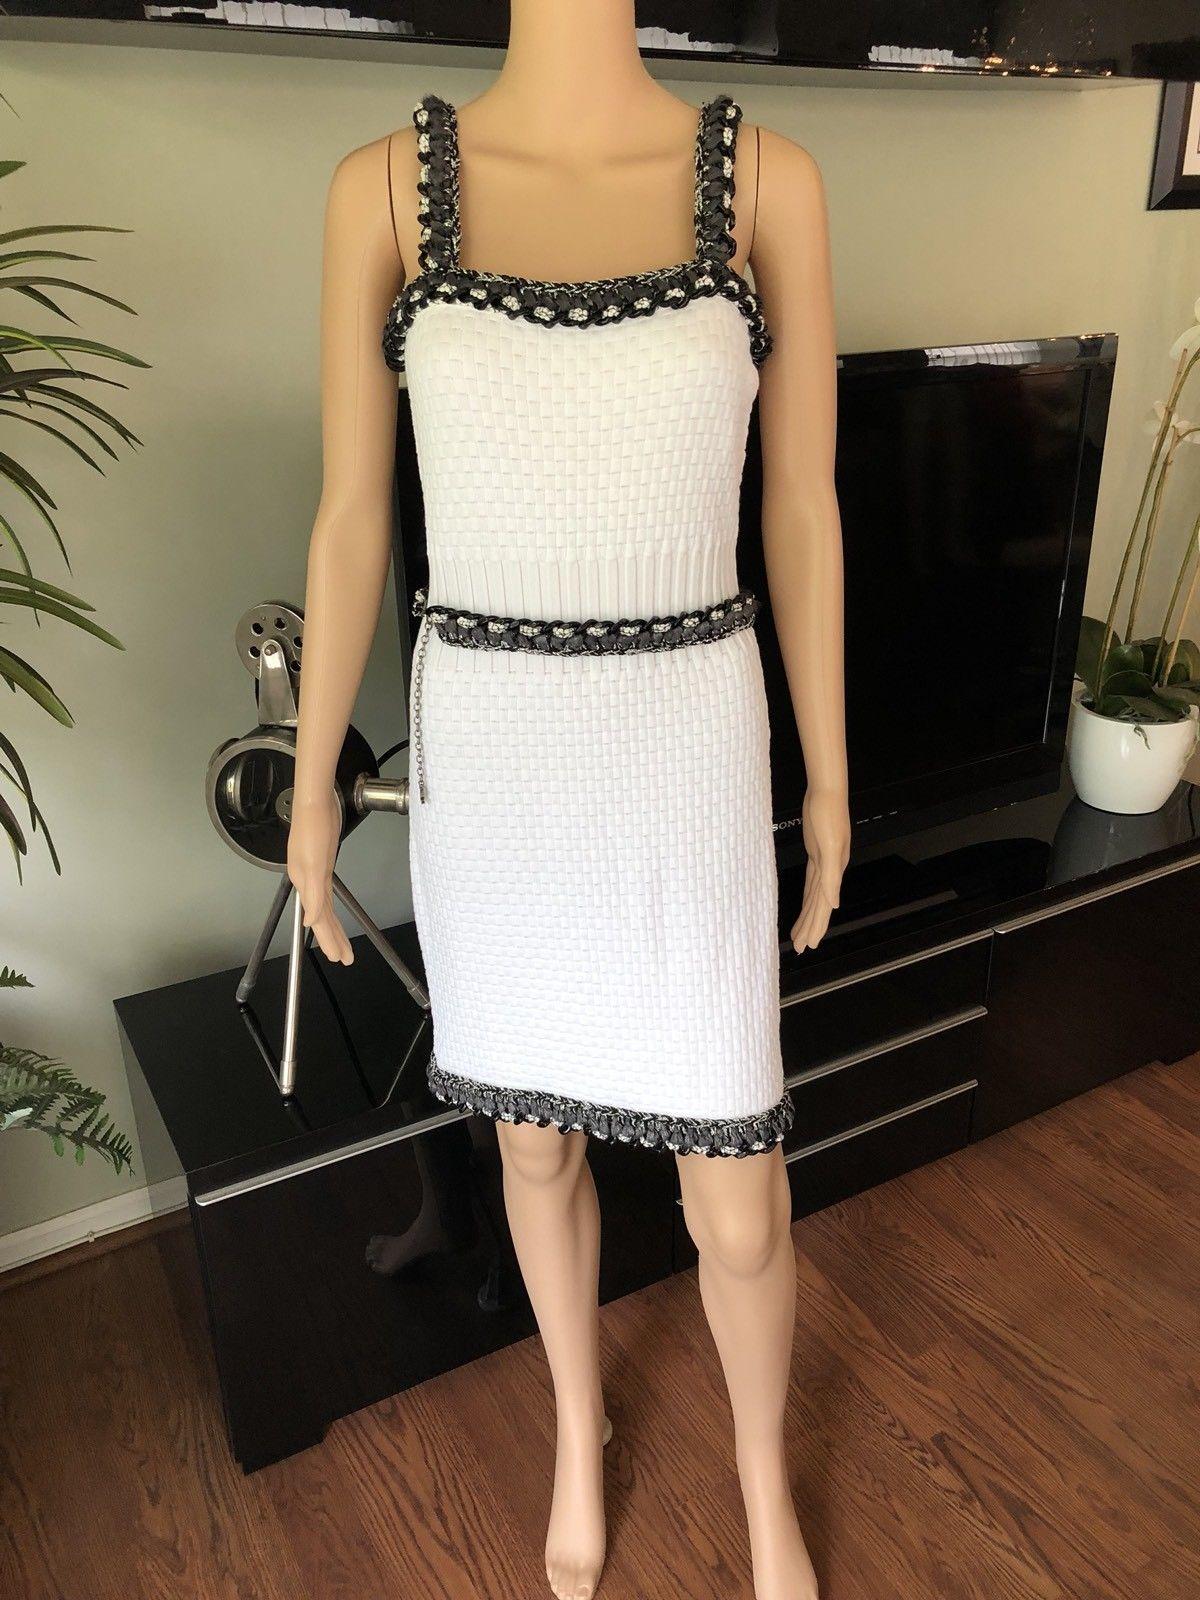 New Chanel S/S 2014 Runway Knit Chain Embellished Trim White Mini Dress FR 40

Chanel sleeveless mini dress with textured pattern throughout, chain-link trim, square neck, belt accent at waist and concealed zip closure at side.

ABOUT